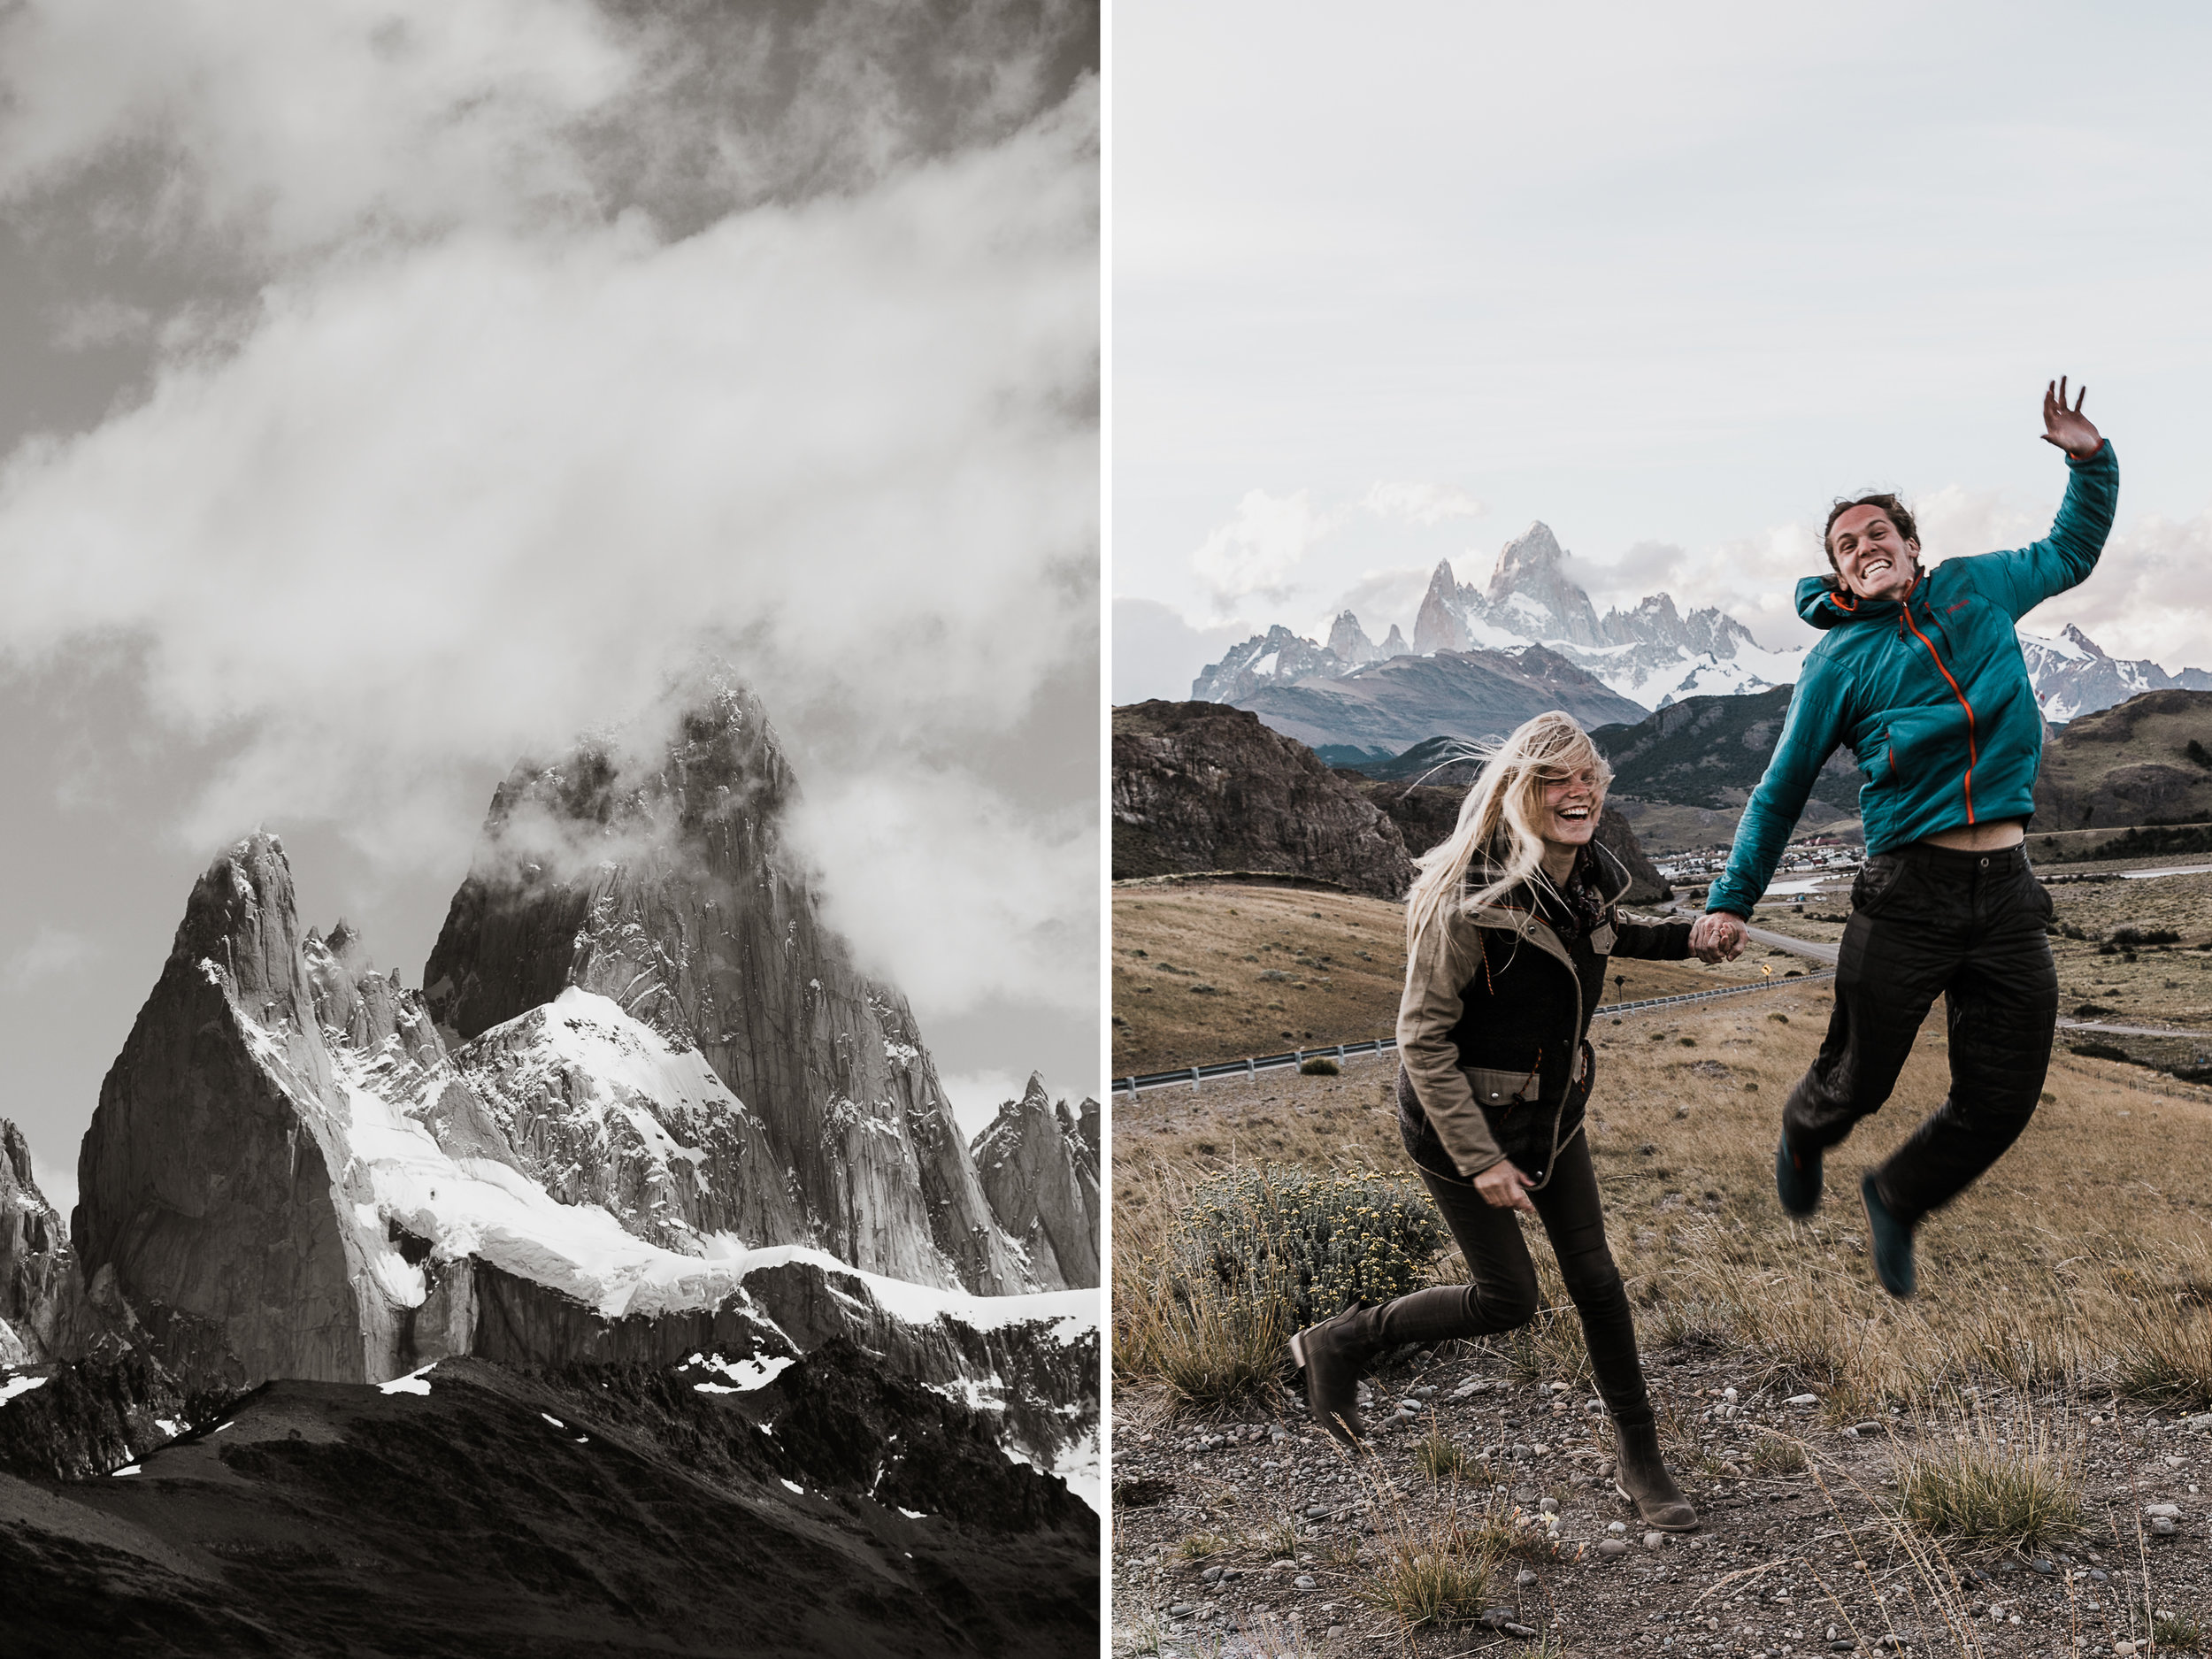 sunset + sunrise in el chalten, argentina | 24 hours of fitz roy | patagonia wedding + elopement photographers | the hearnes adventure photography | www.thehearnes.com